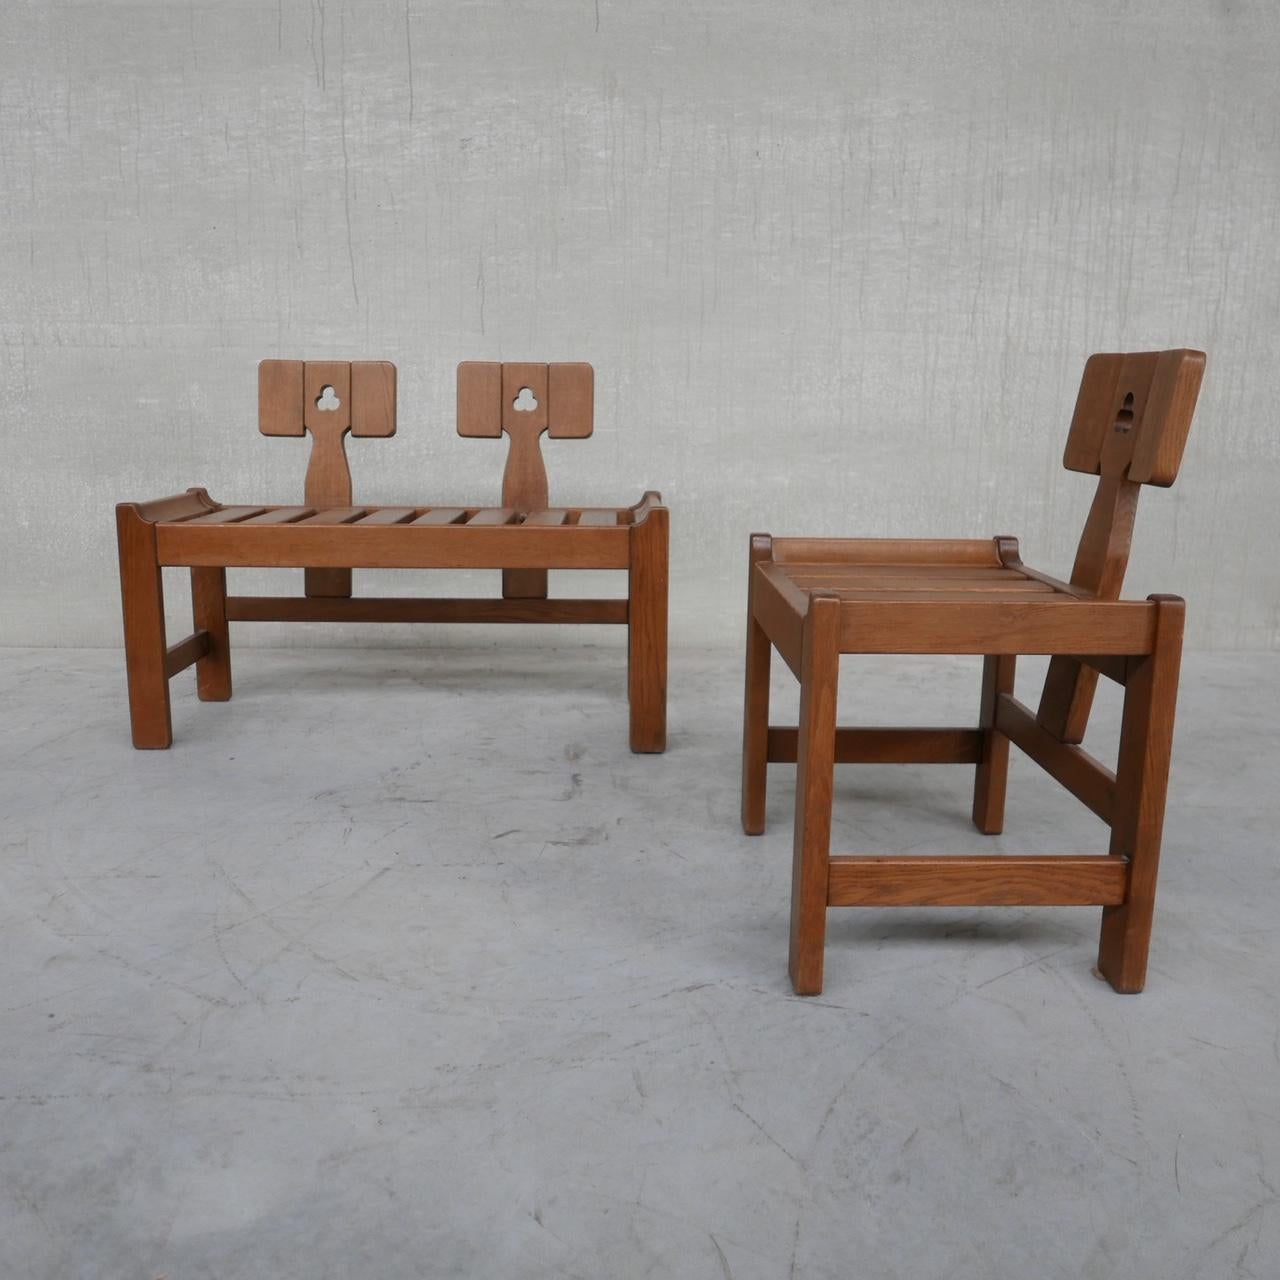 A two seater and single seater lounge chair. 

Formed from solid oak. 

France, c1960s. 

By French design legends, Guillerme et Chambron. 

A scarce model, possibly only eight of these models were made.

Price is for the set.